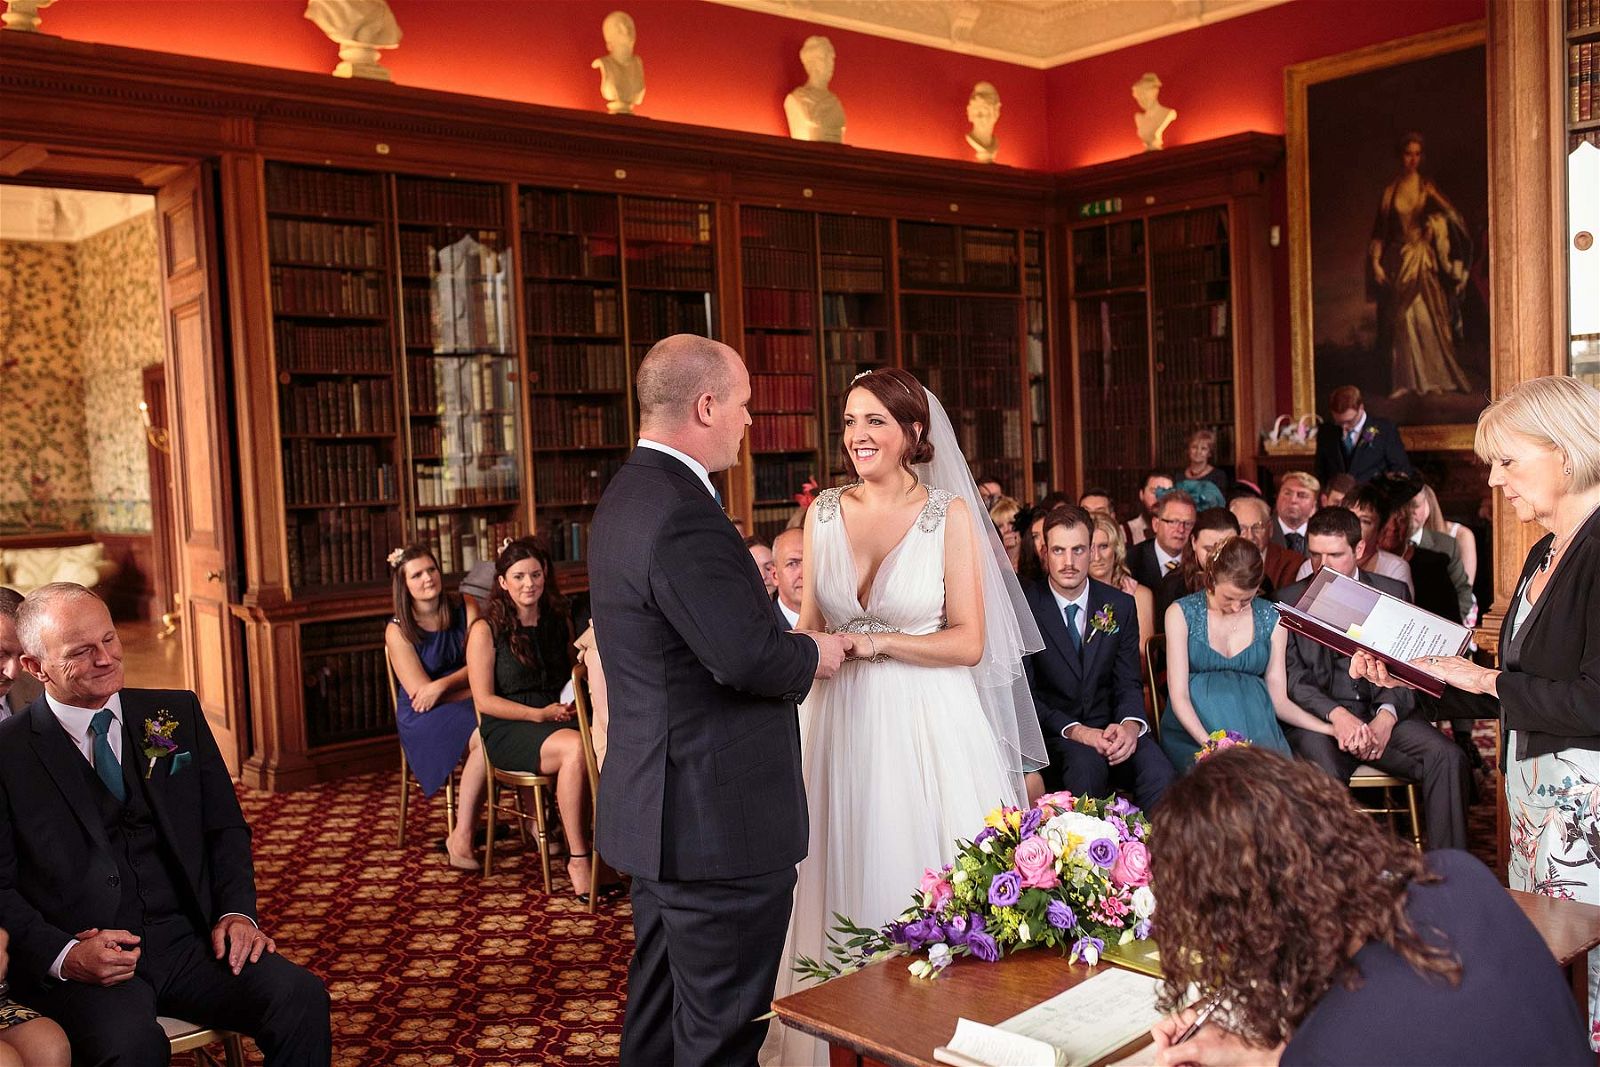 Unobtrusive photographs capturing the story of the wedding ceremony at Sandon Hall in Stafford by Stafford Reportage Wedding Photographer Stuart James